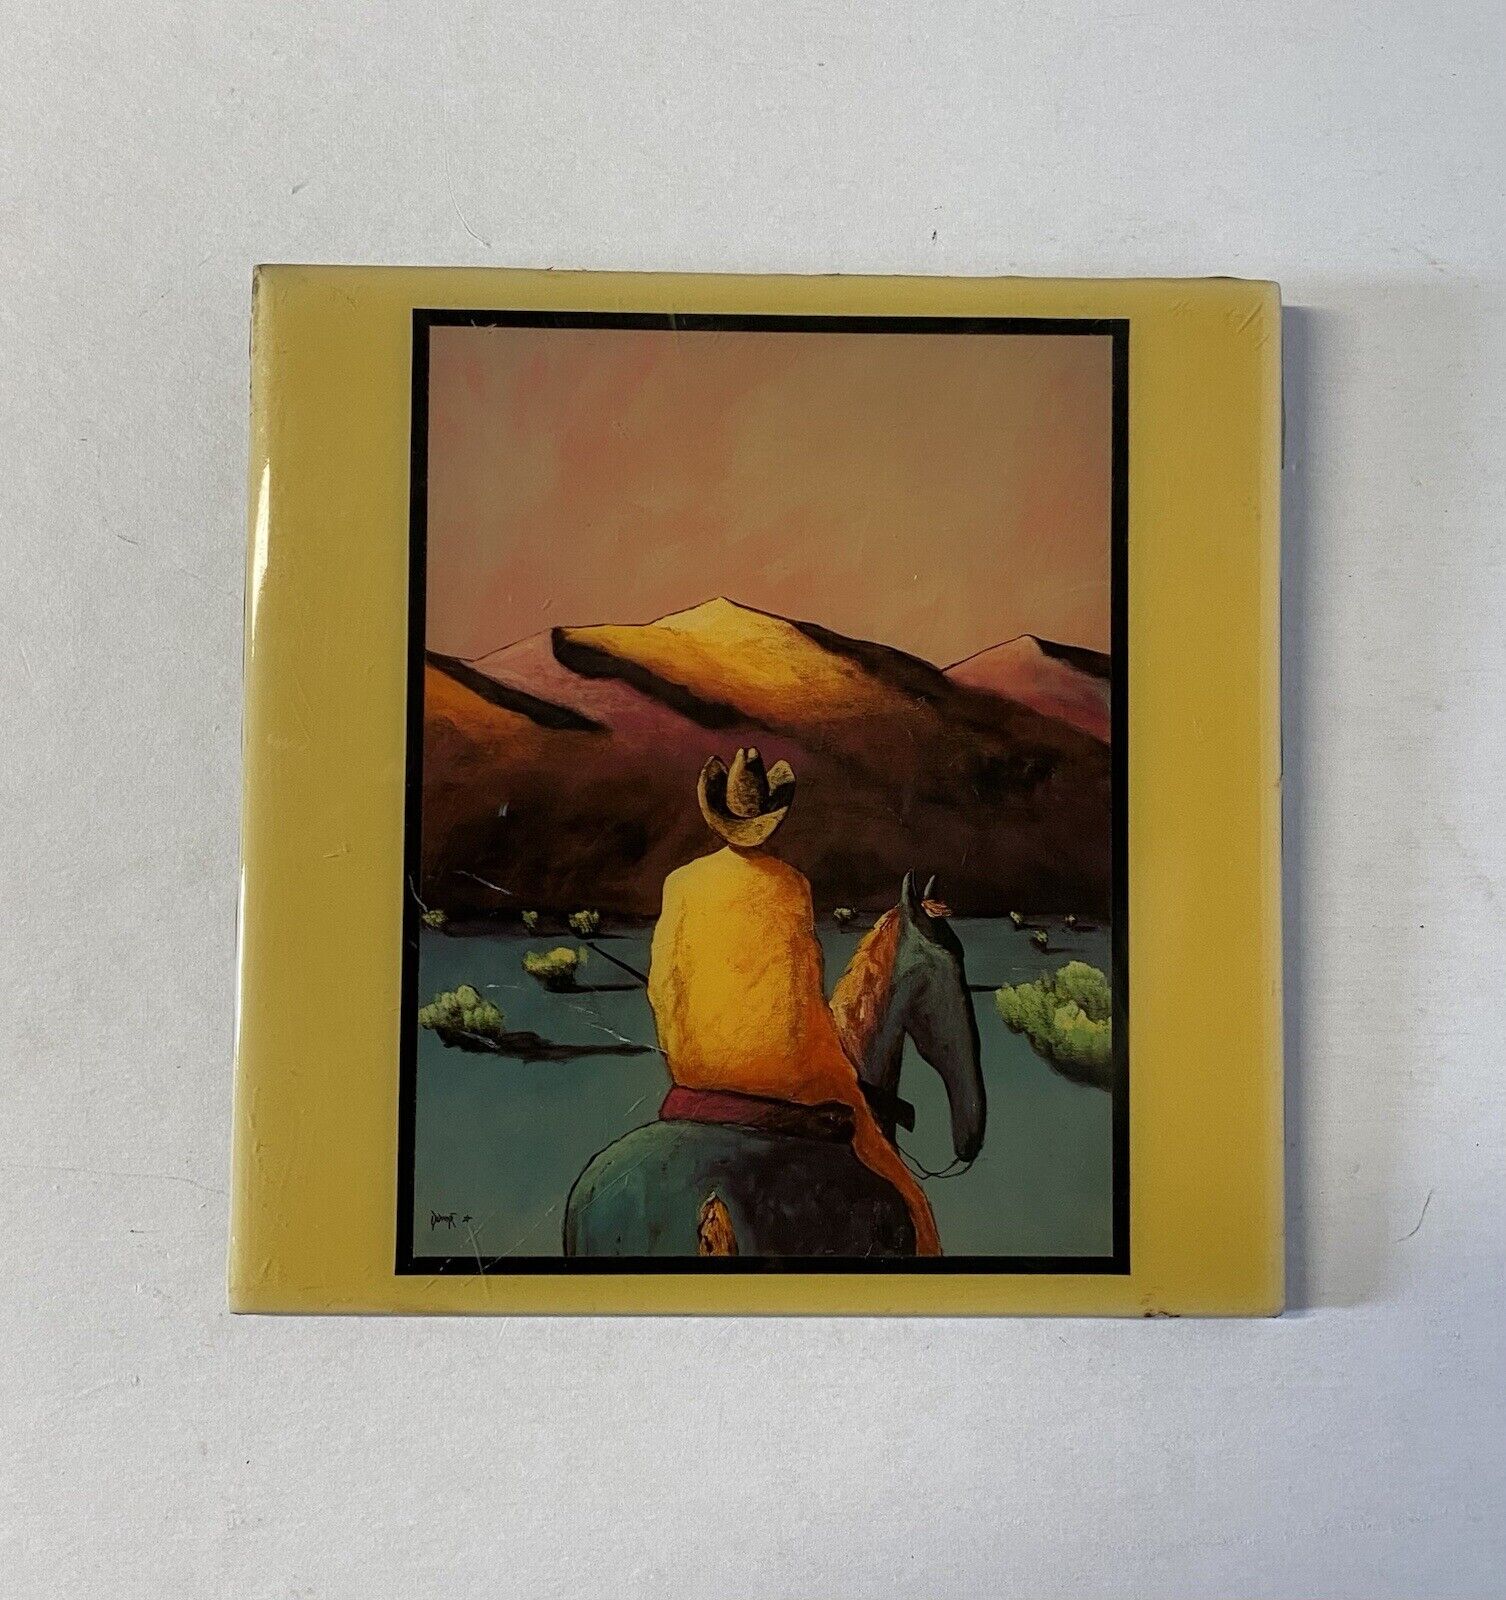 Vintage Ceramic Tile Western Cowboy Downe Burns Are There Any Real Cowboys Left